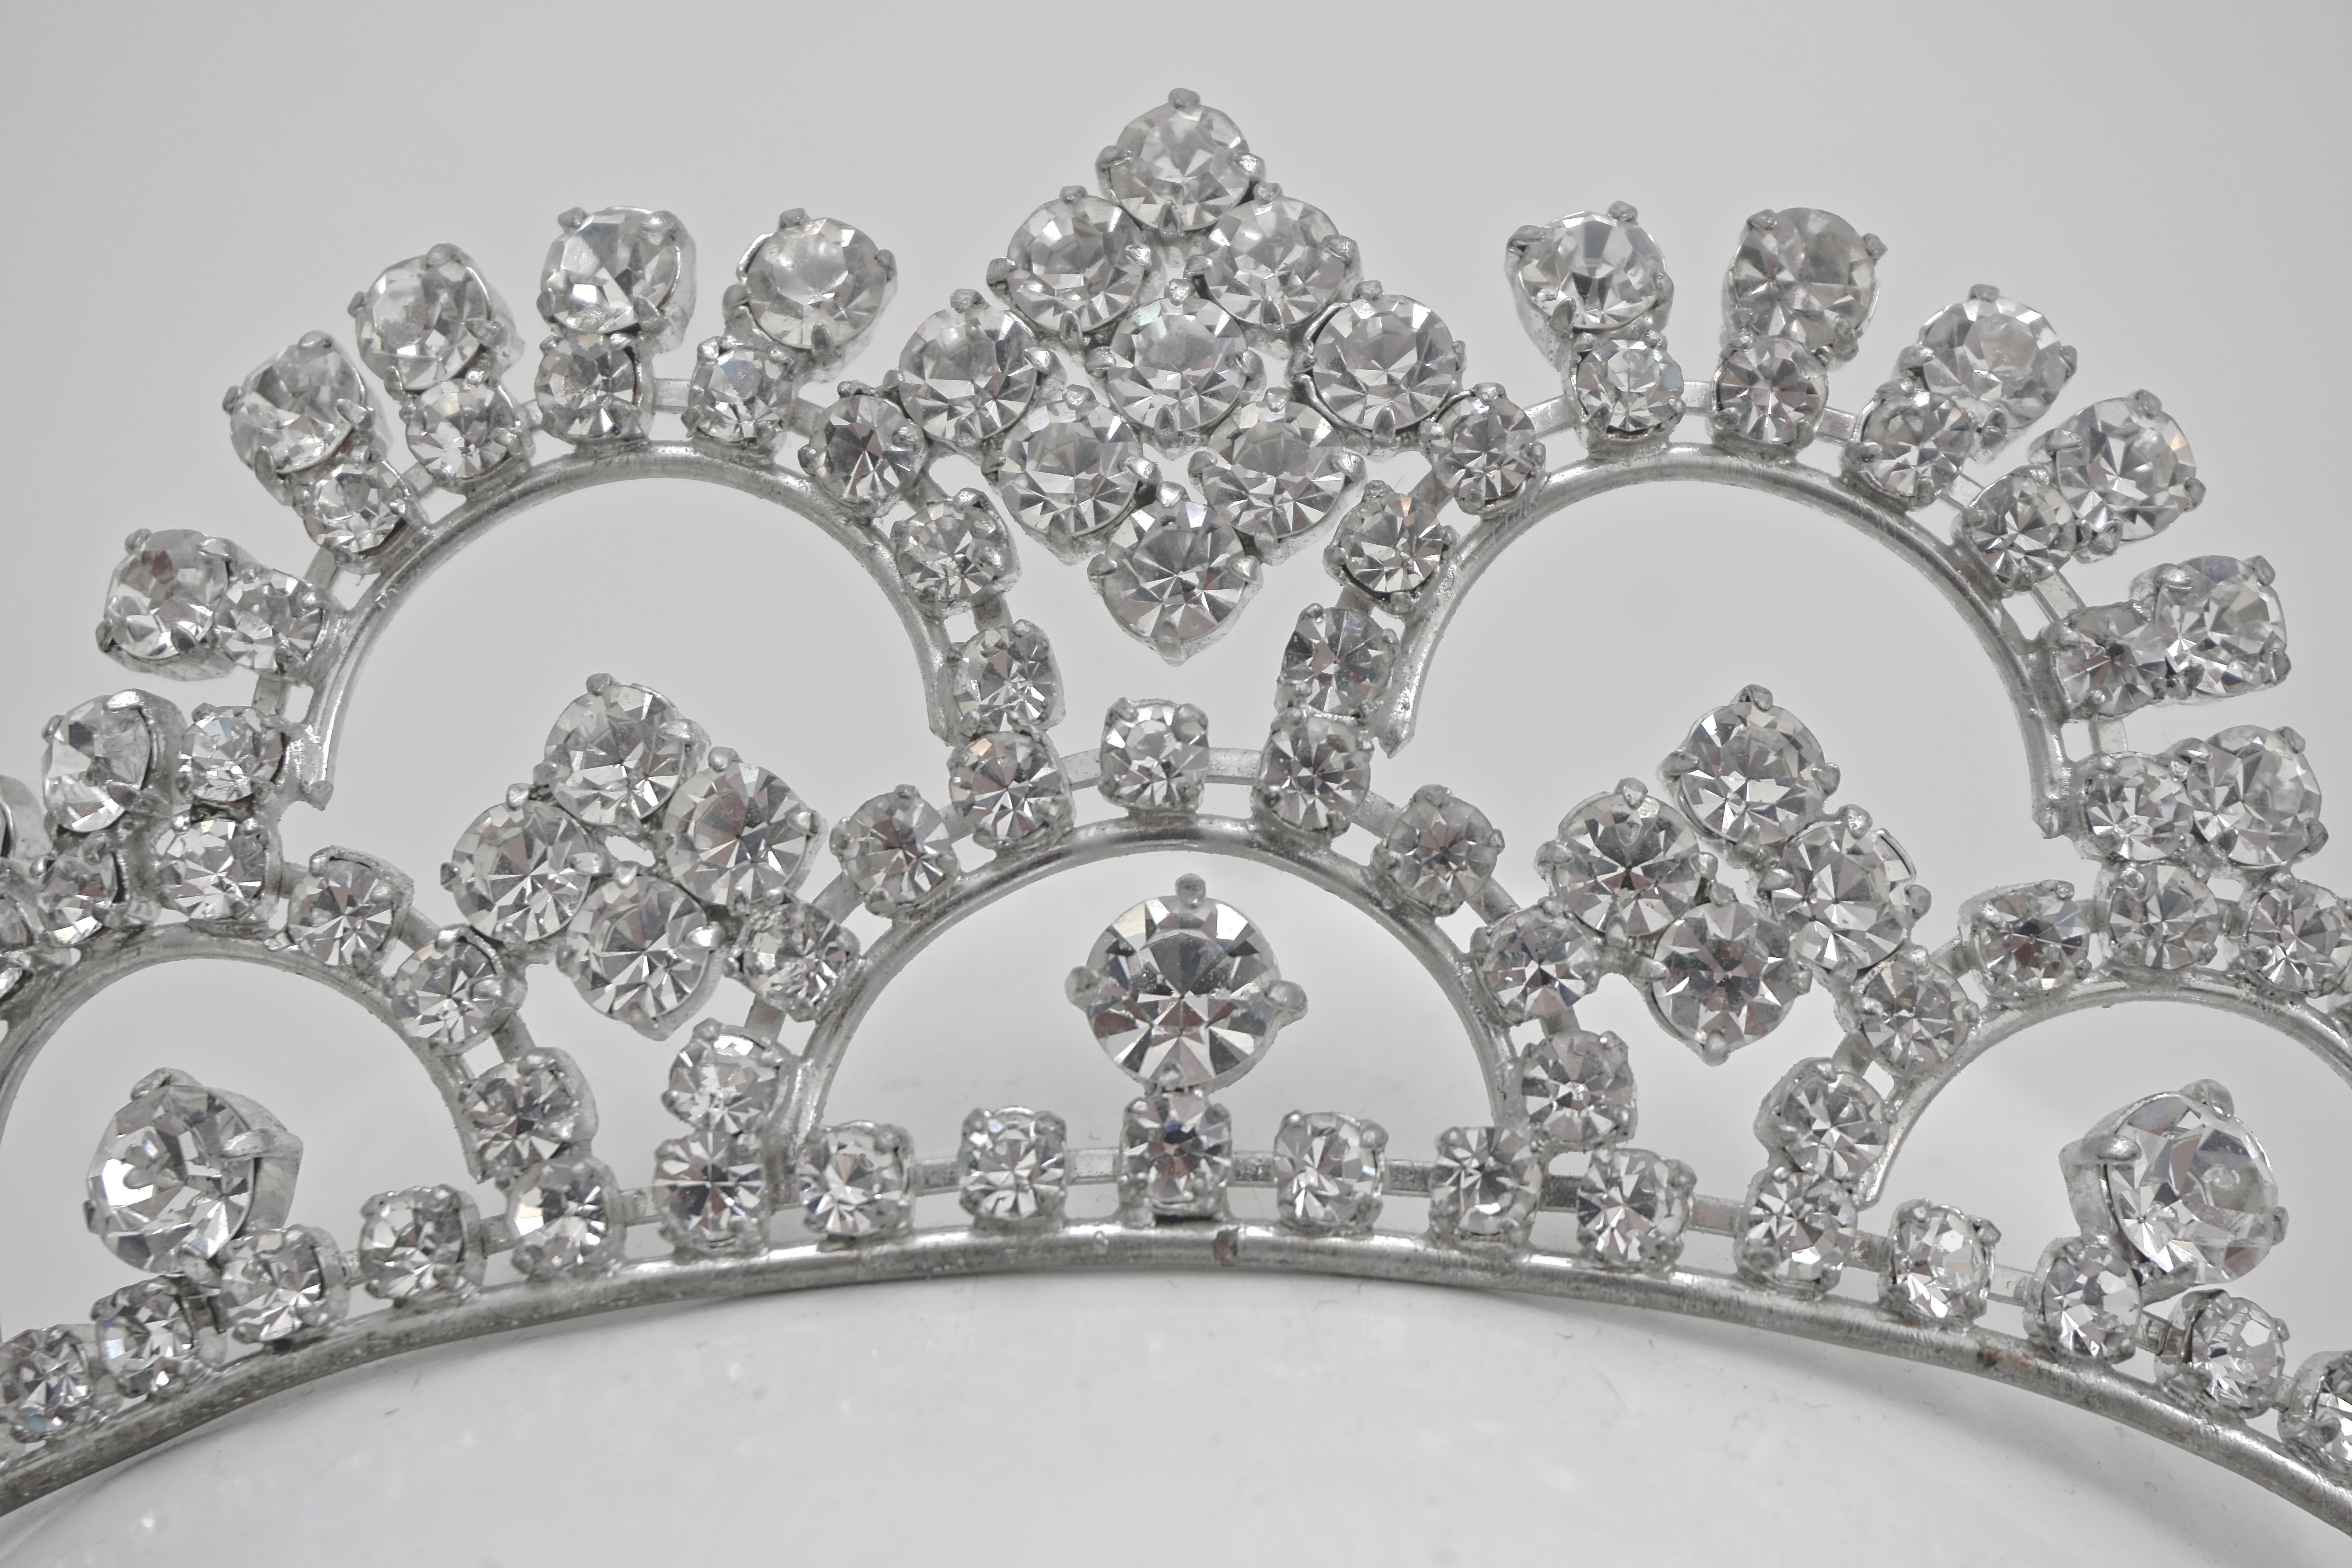 Fabulous silver tone tiara set with clear sparkling faceted rhinestones, circa 1950s. This is a well made quality tiara in a classic design, made to sit on top of the head. Measuring height 5cm / 1.97 inches, the large rhinestones are all prong set.